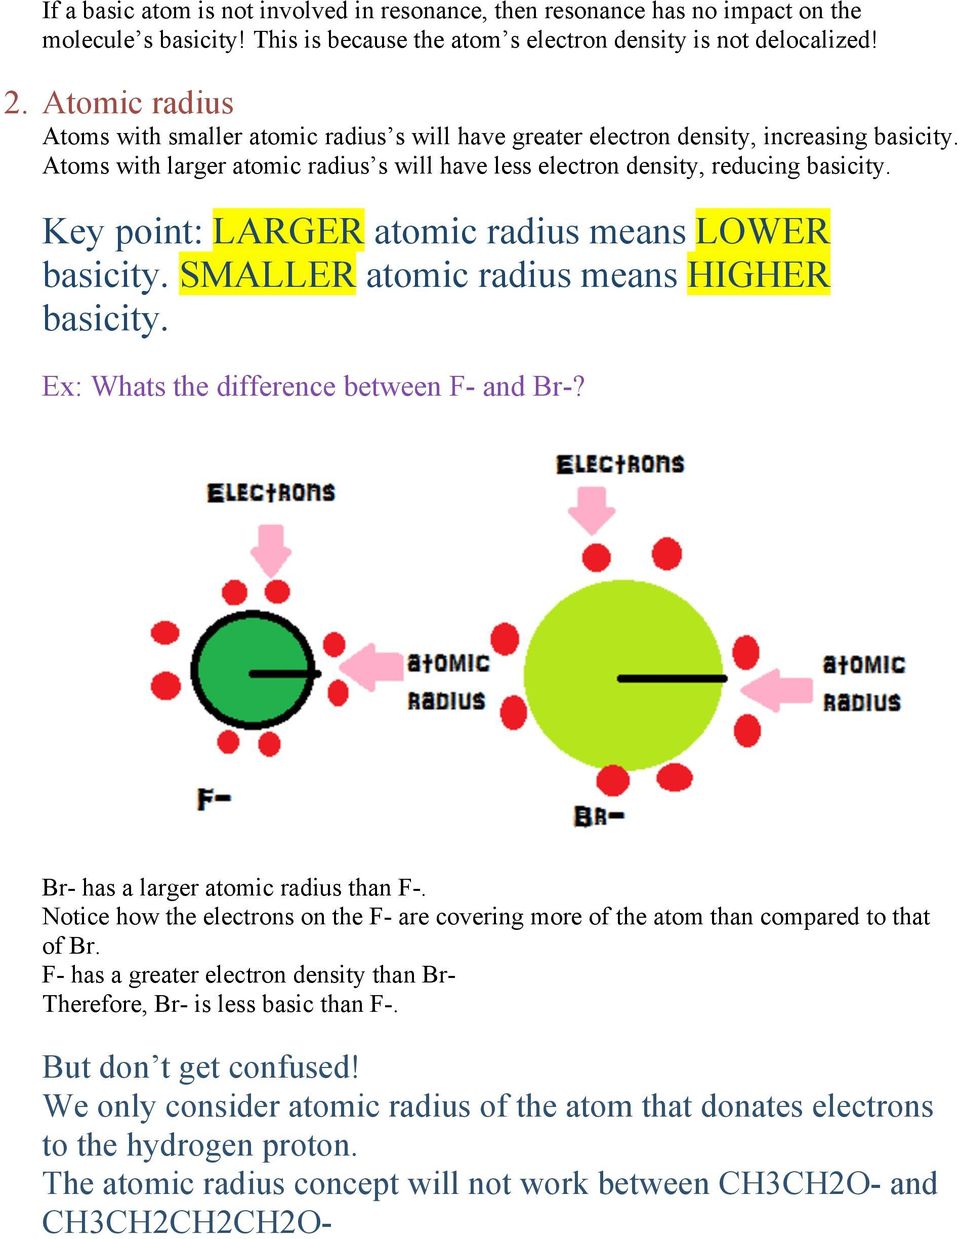 Key point: LARGER atomic radius means LOWER basicity. SMALLER atomic radius means HIGHER basicity. Ex: Whats the difference between F- and Br-? Br- has a larger atomic radius than F-.